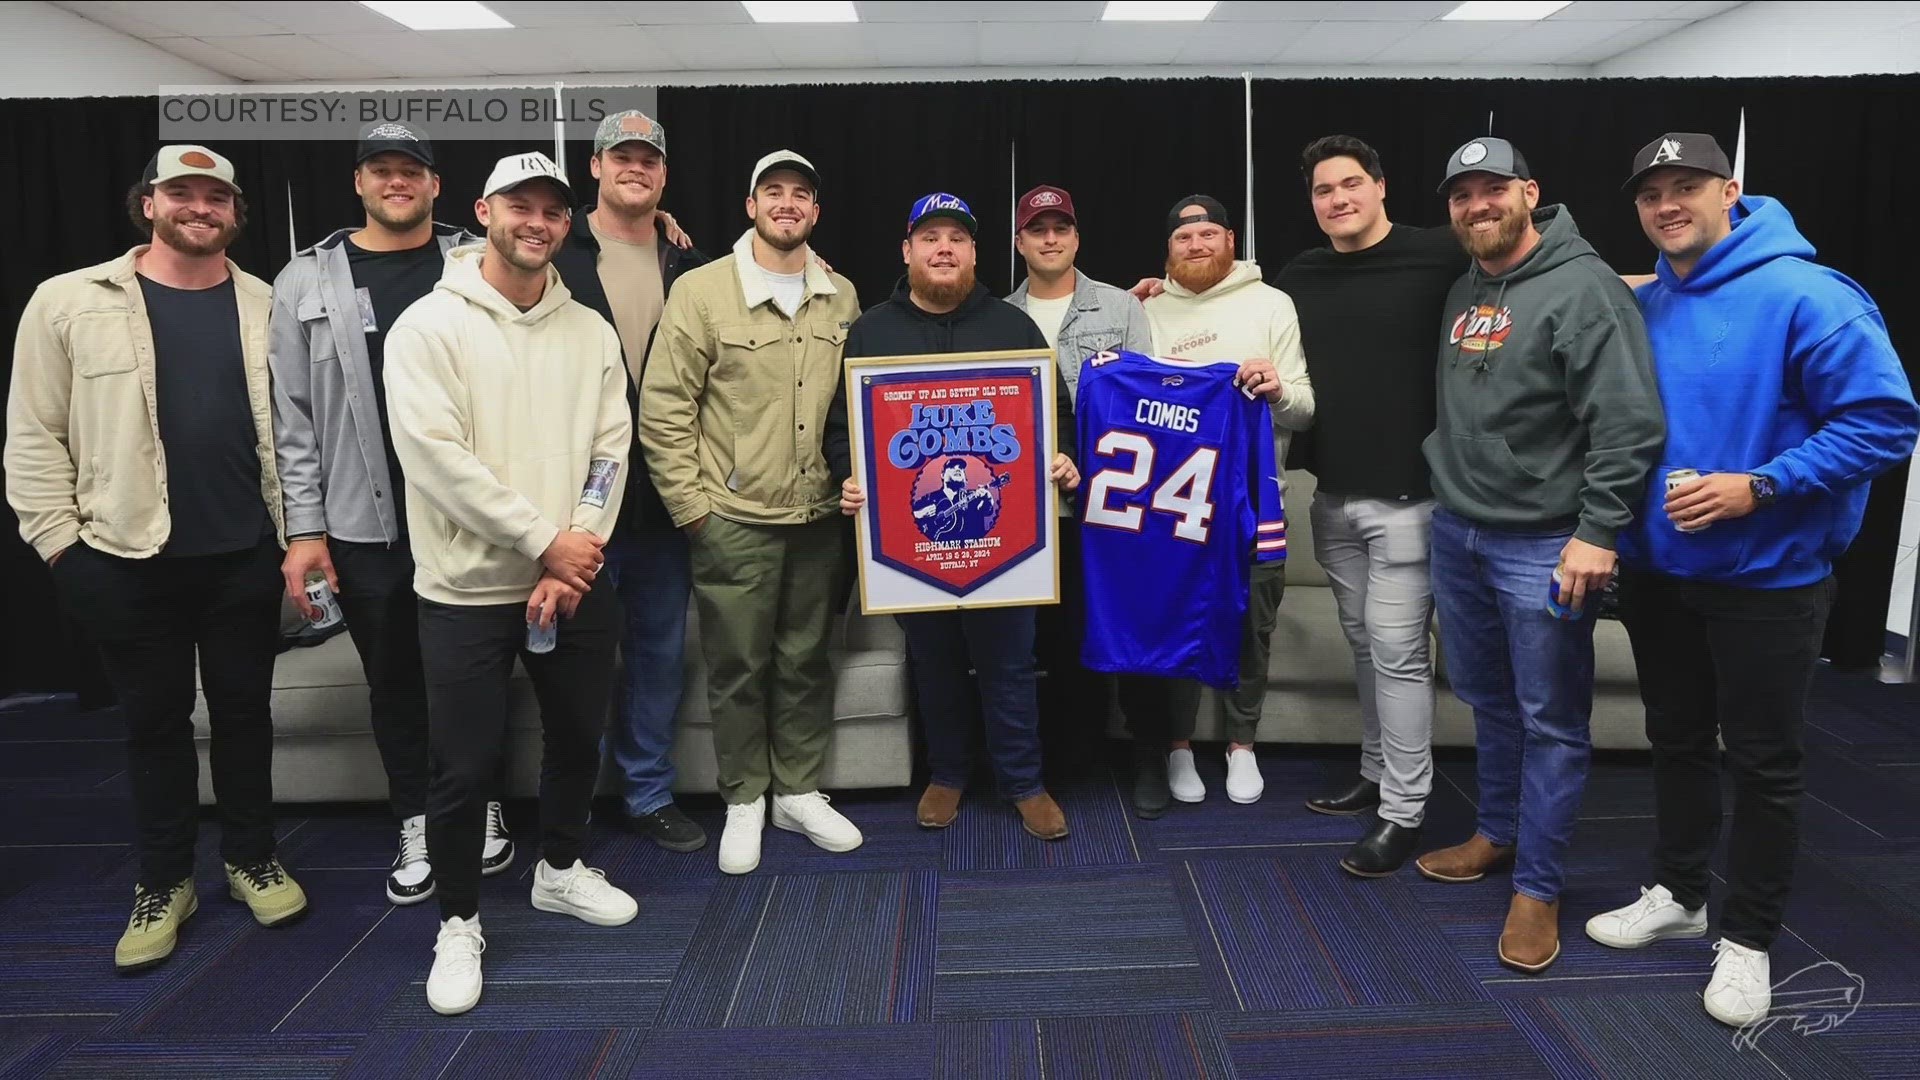 The Bills' social media documented Combs' visit to Highmark Stadium, including meetings with Brandon Beane and some of the players.